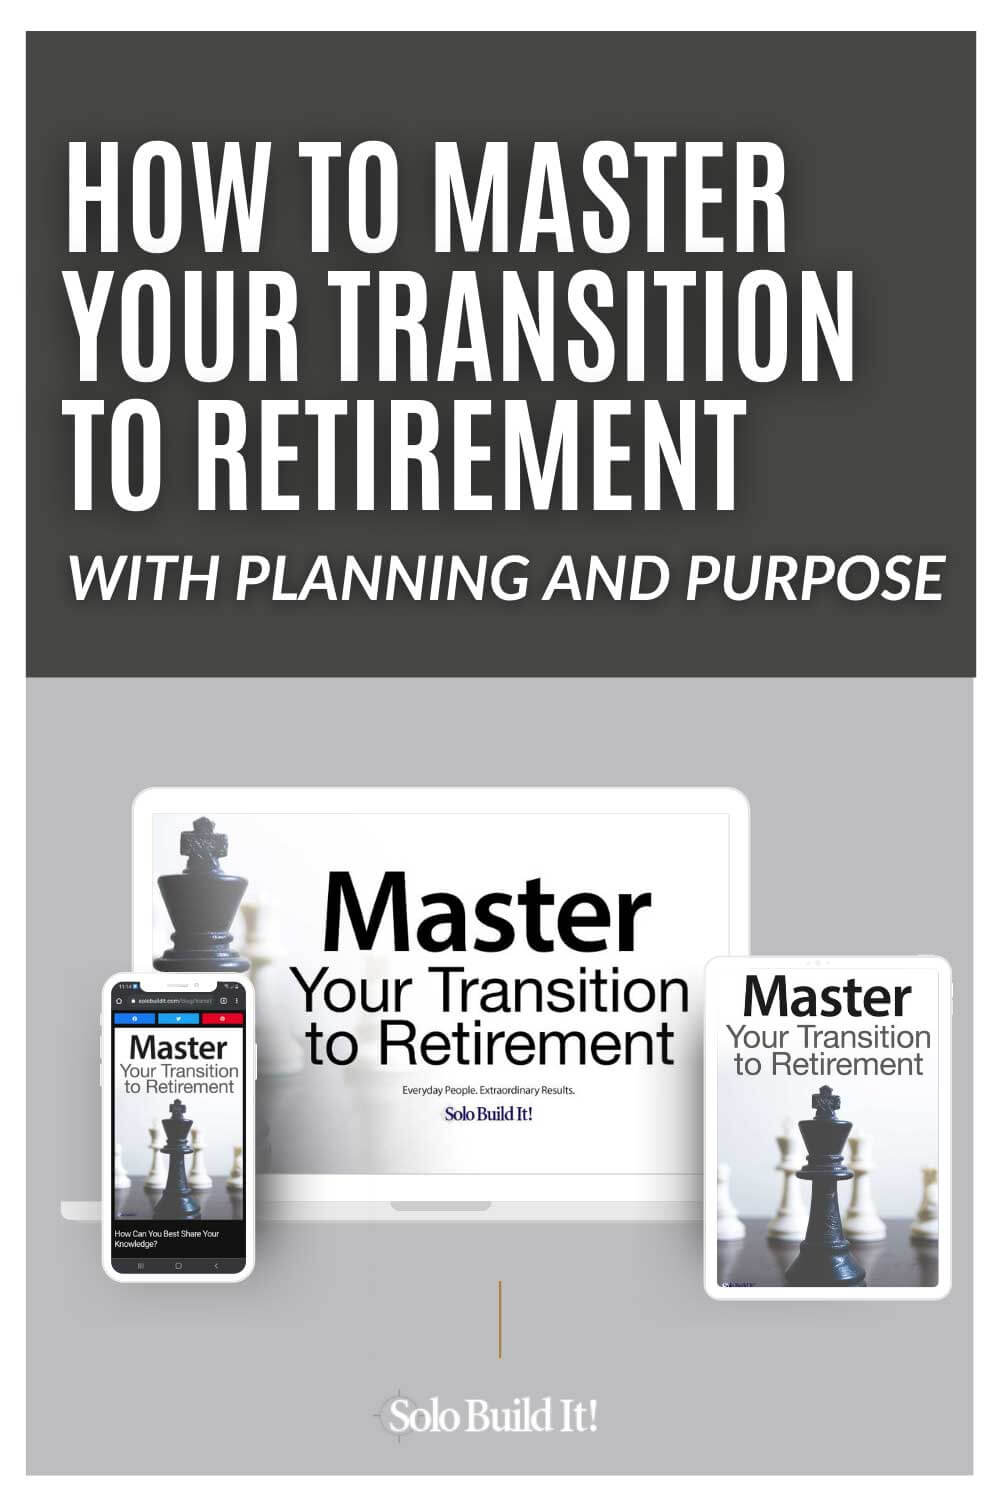 How to Master Your Transition to Retirement: Real Life Advice You Can Apply Today